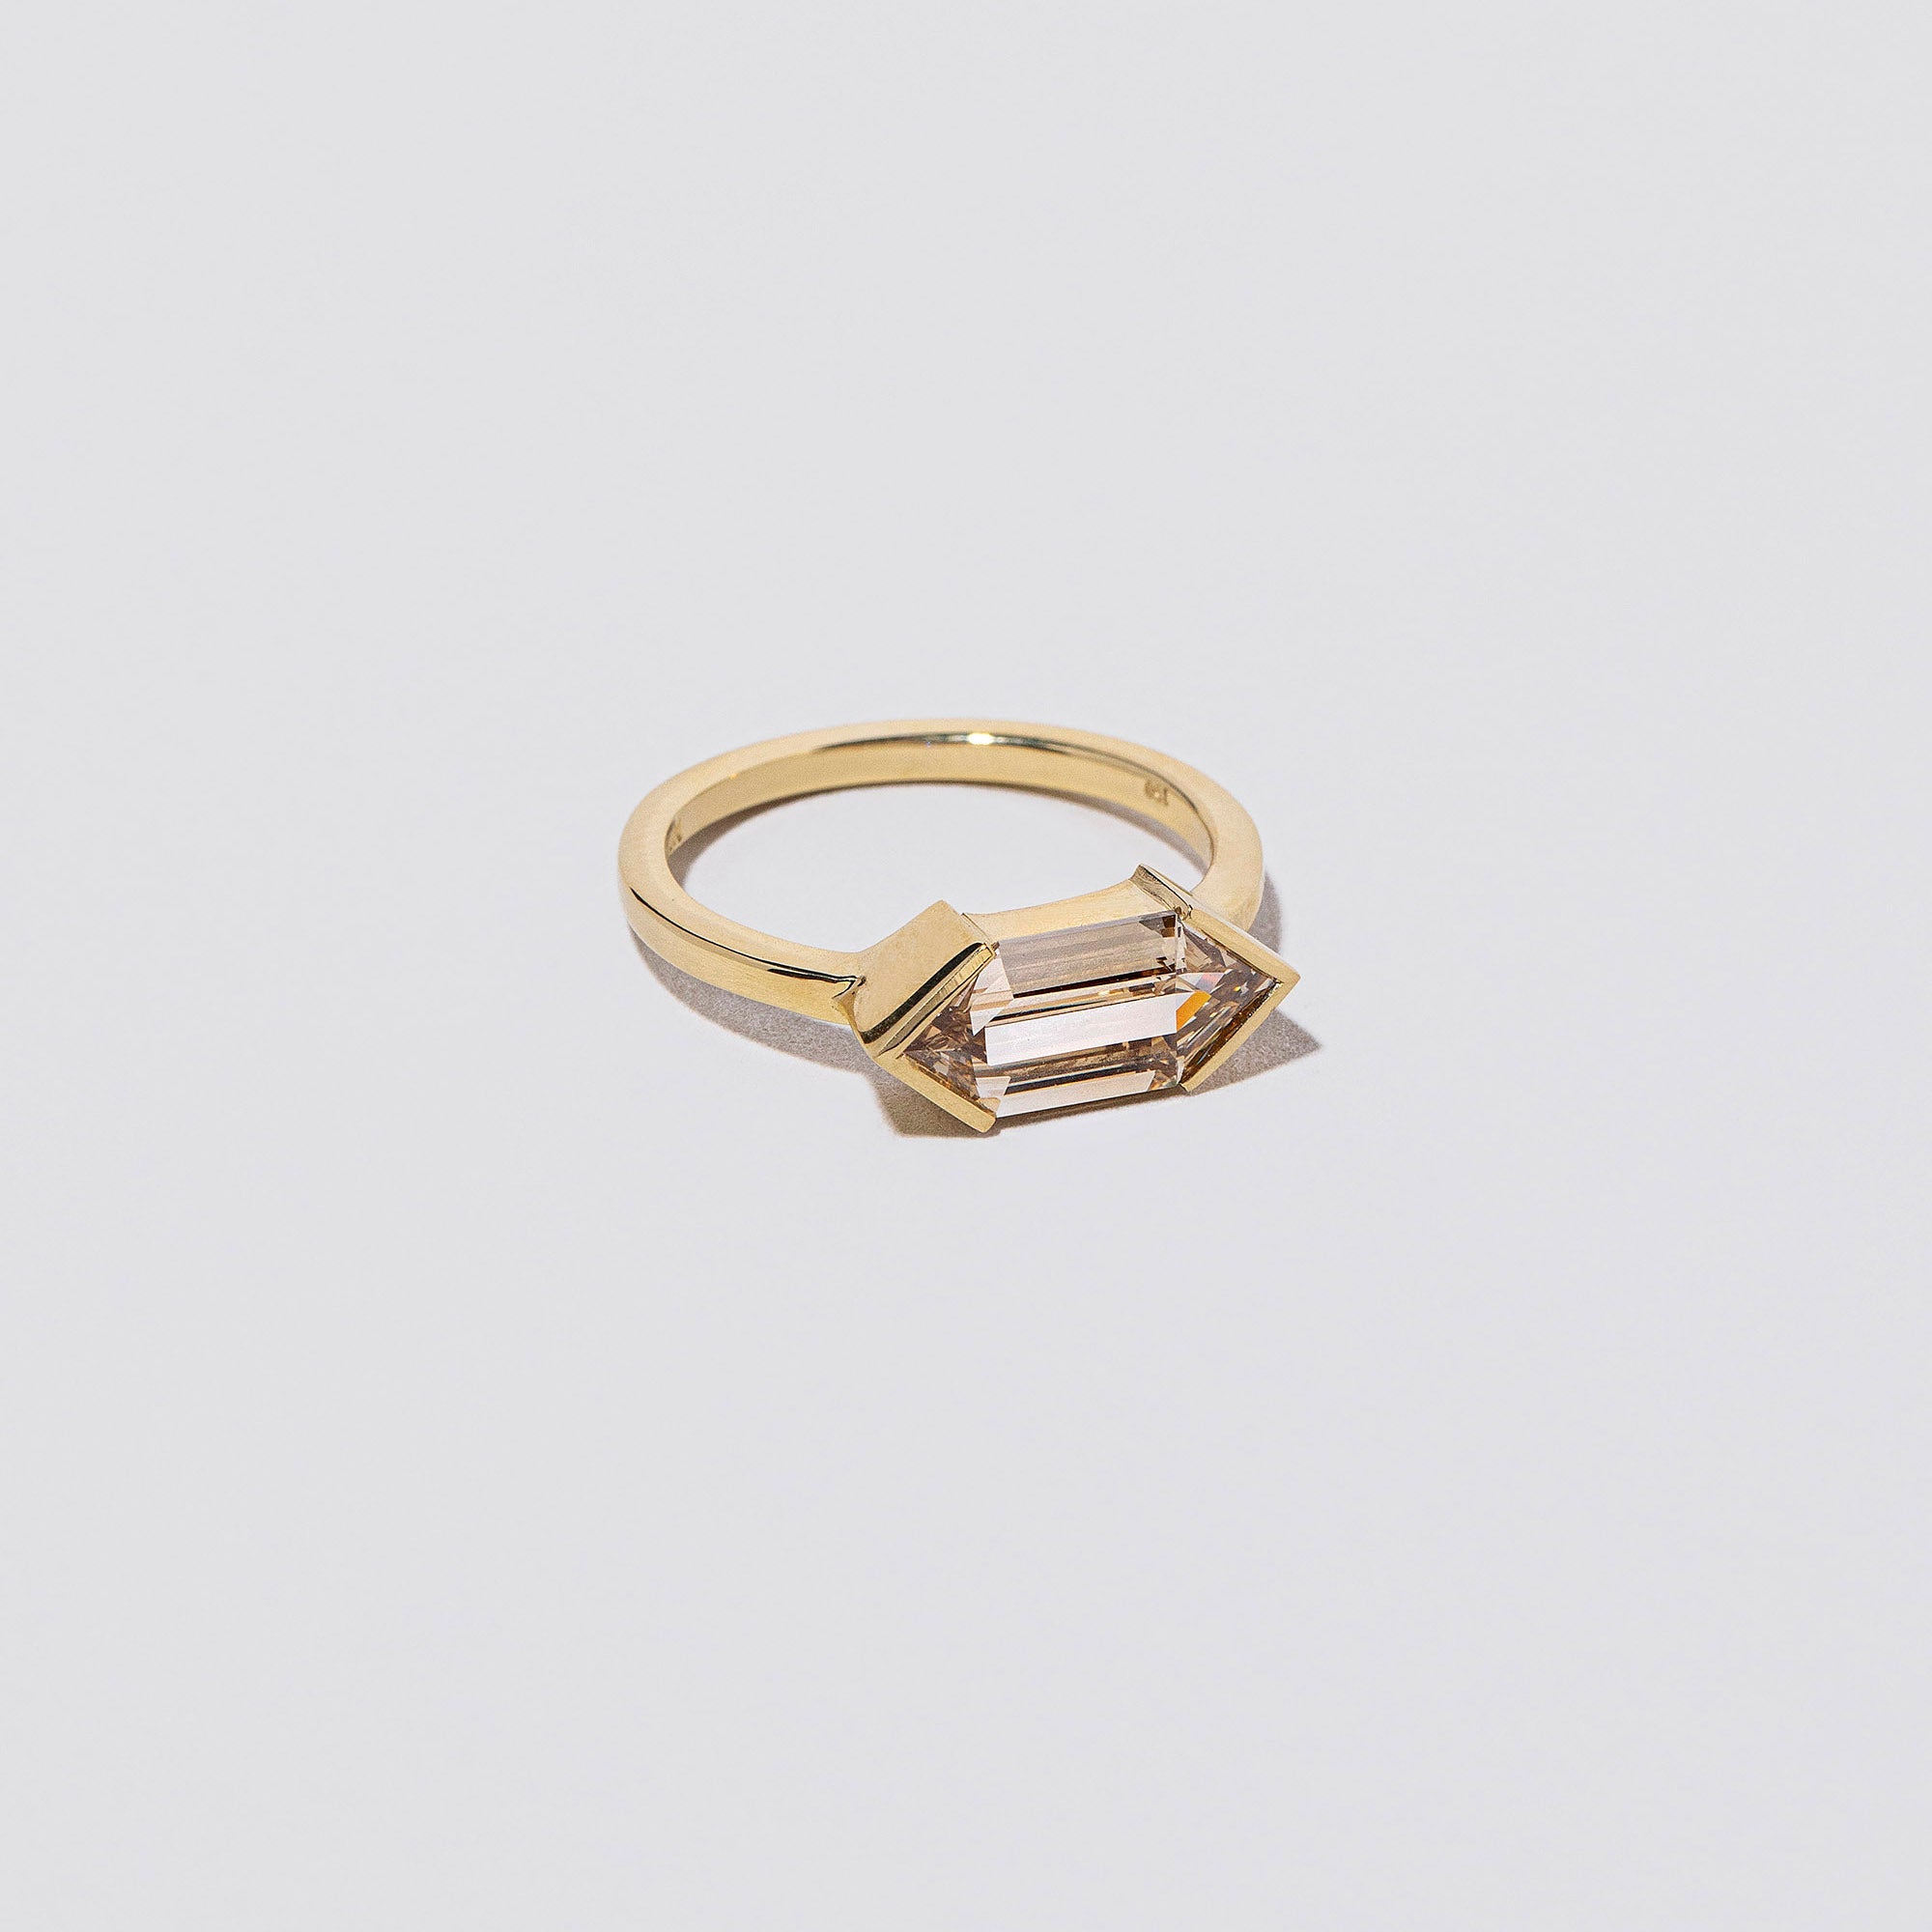 product_details::Wild Side Ring